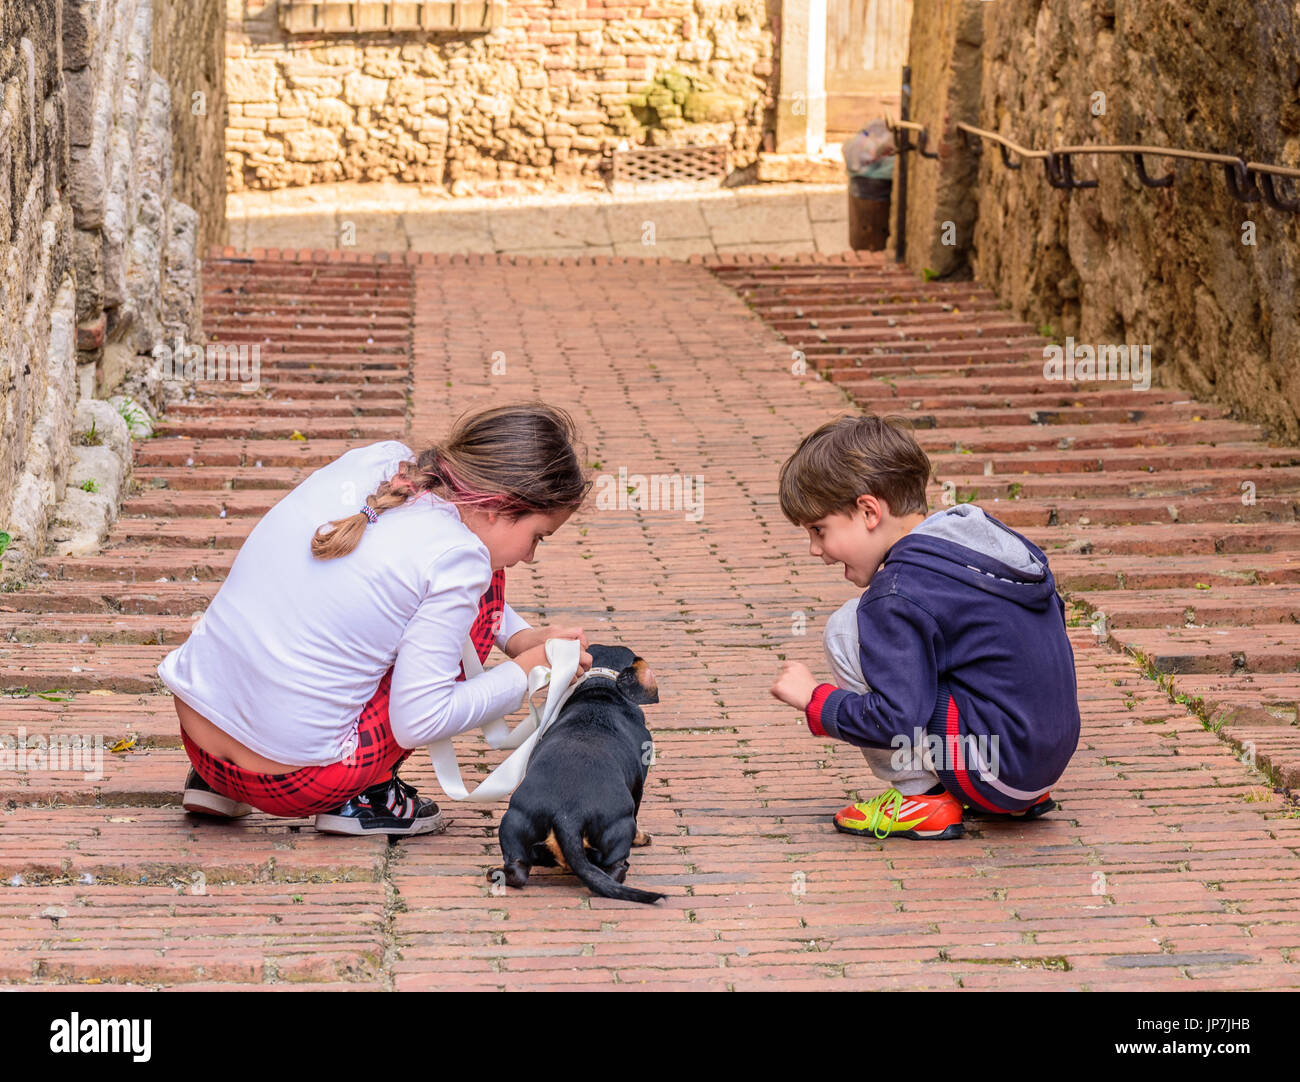 COLLE VAL D'ELSA, ITALY - APRIL 25, 2017 - Two kids play with a puppy dog in an alley of Colle Val d'Elsa. Stock Photo